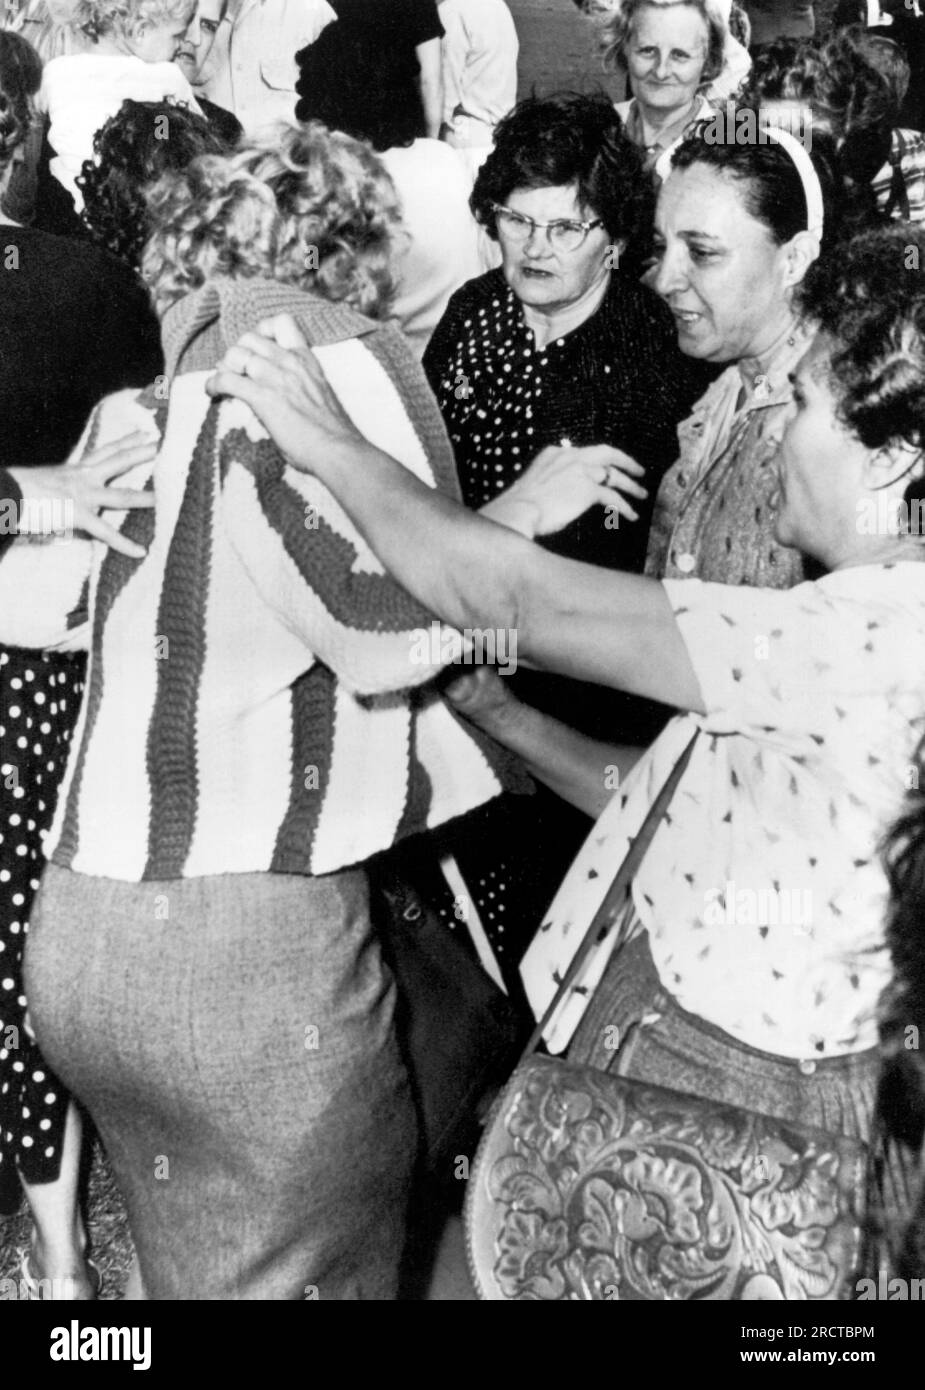 New Orleans, Louisiana:  December 6, 1960 Kirstin Steene, an English professor at the Univeristy of Alberta in Canada, is roughed up by local women demonstrators at the Frantz Elementary School as she was filming the first days of integraton at the school. Stock Photo